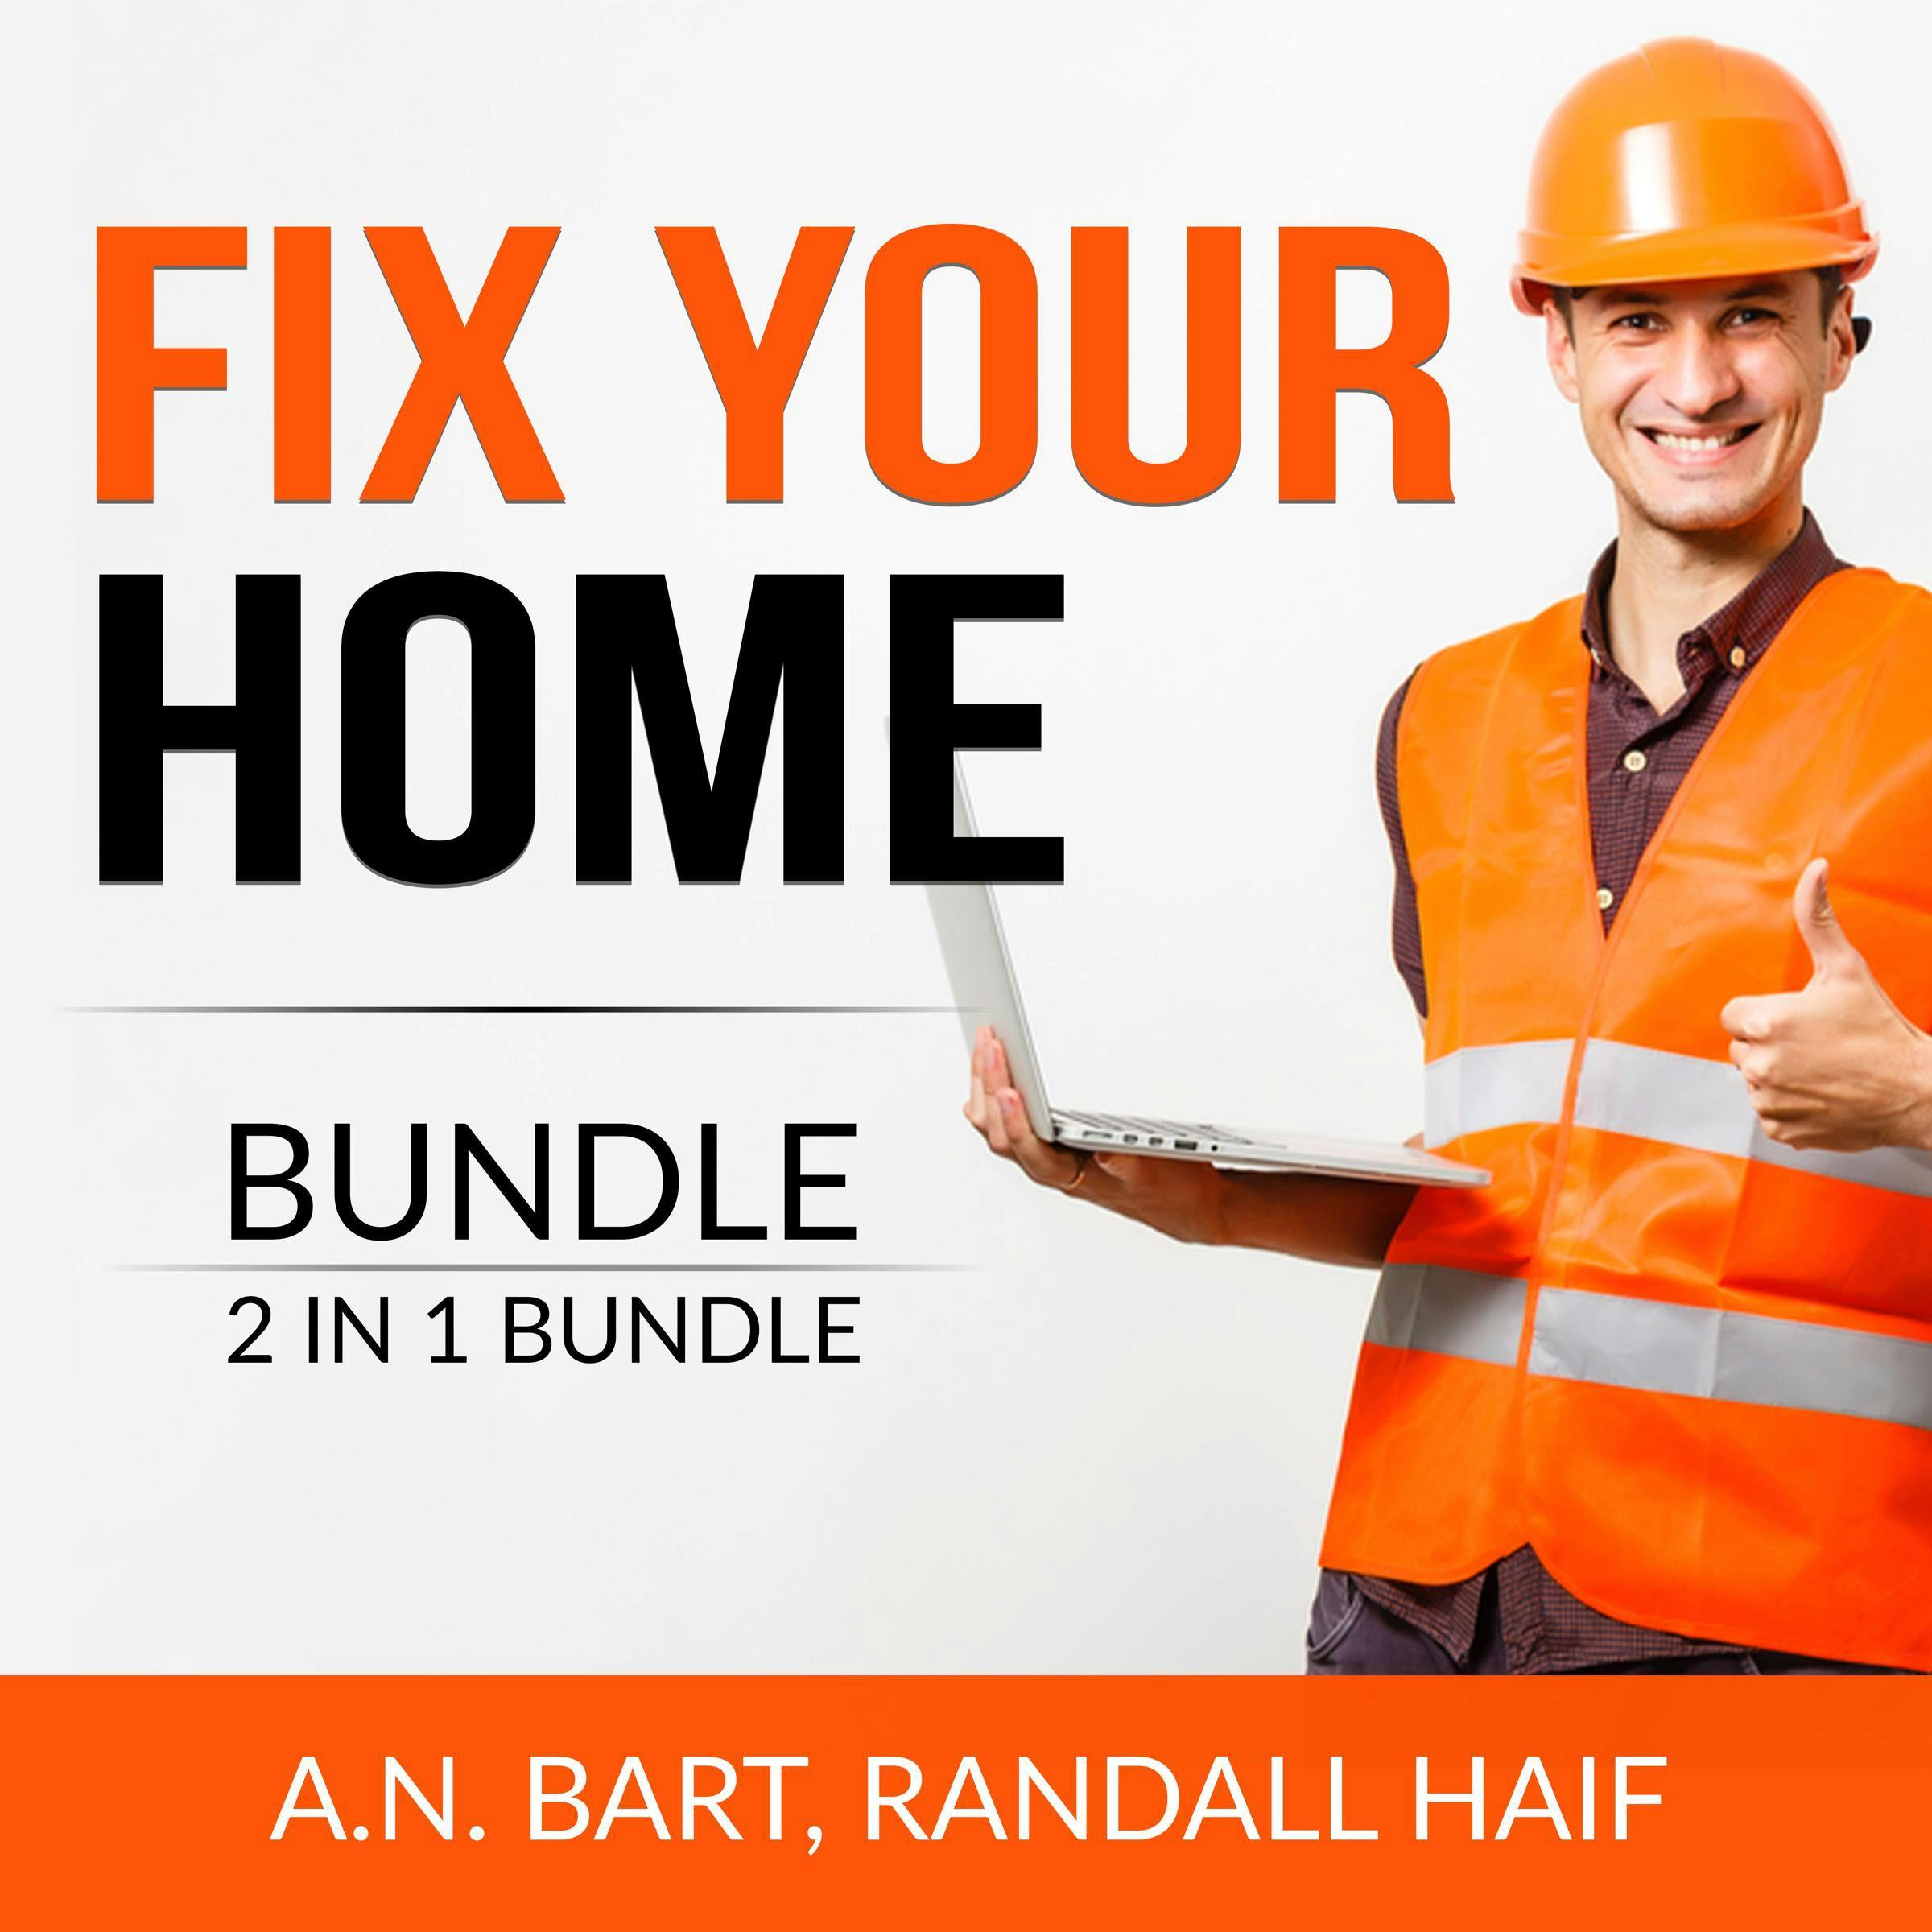 Fix Your Home Bundle, 2 in 1 Bundle: Home Maintenance and Organizing Your Kitchen - Randall Haif, A.N. Bart